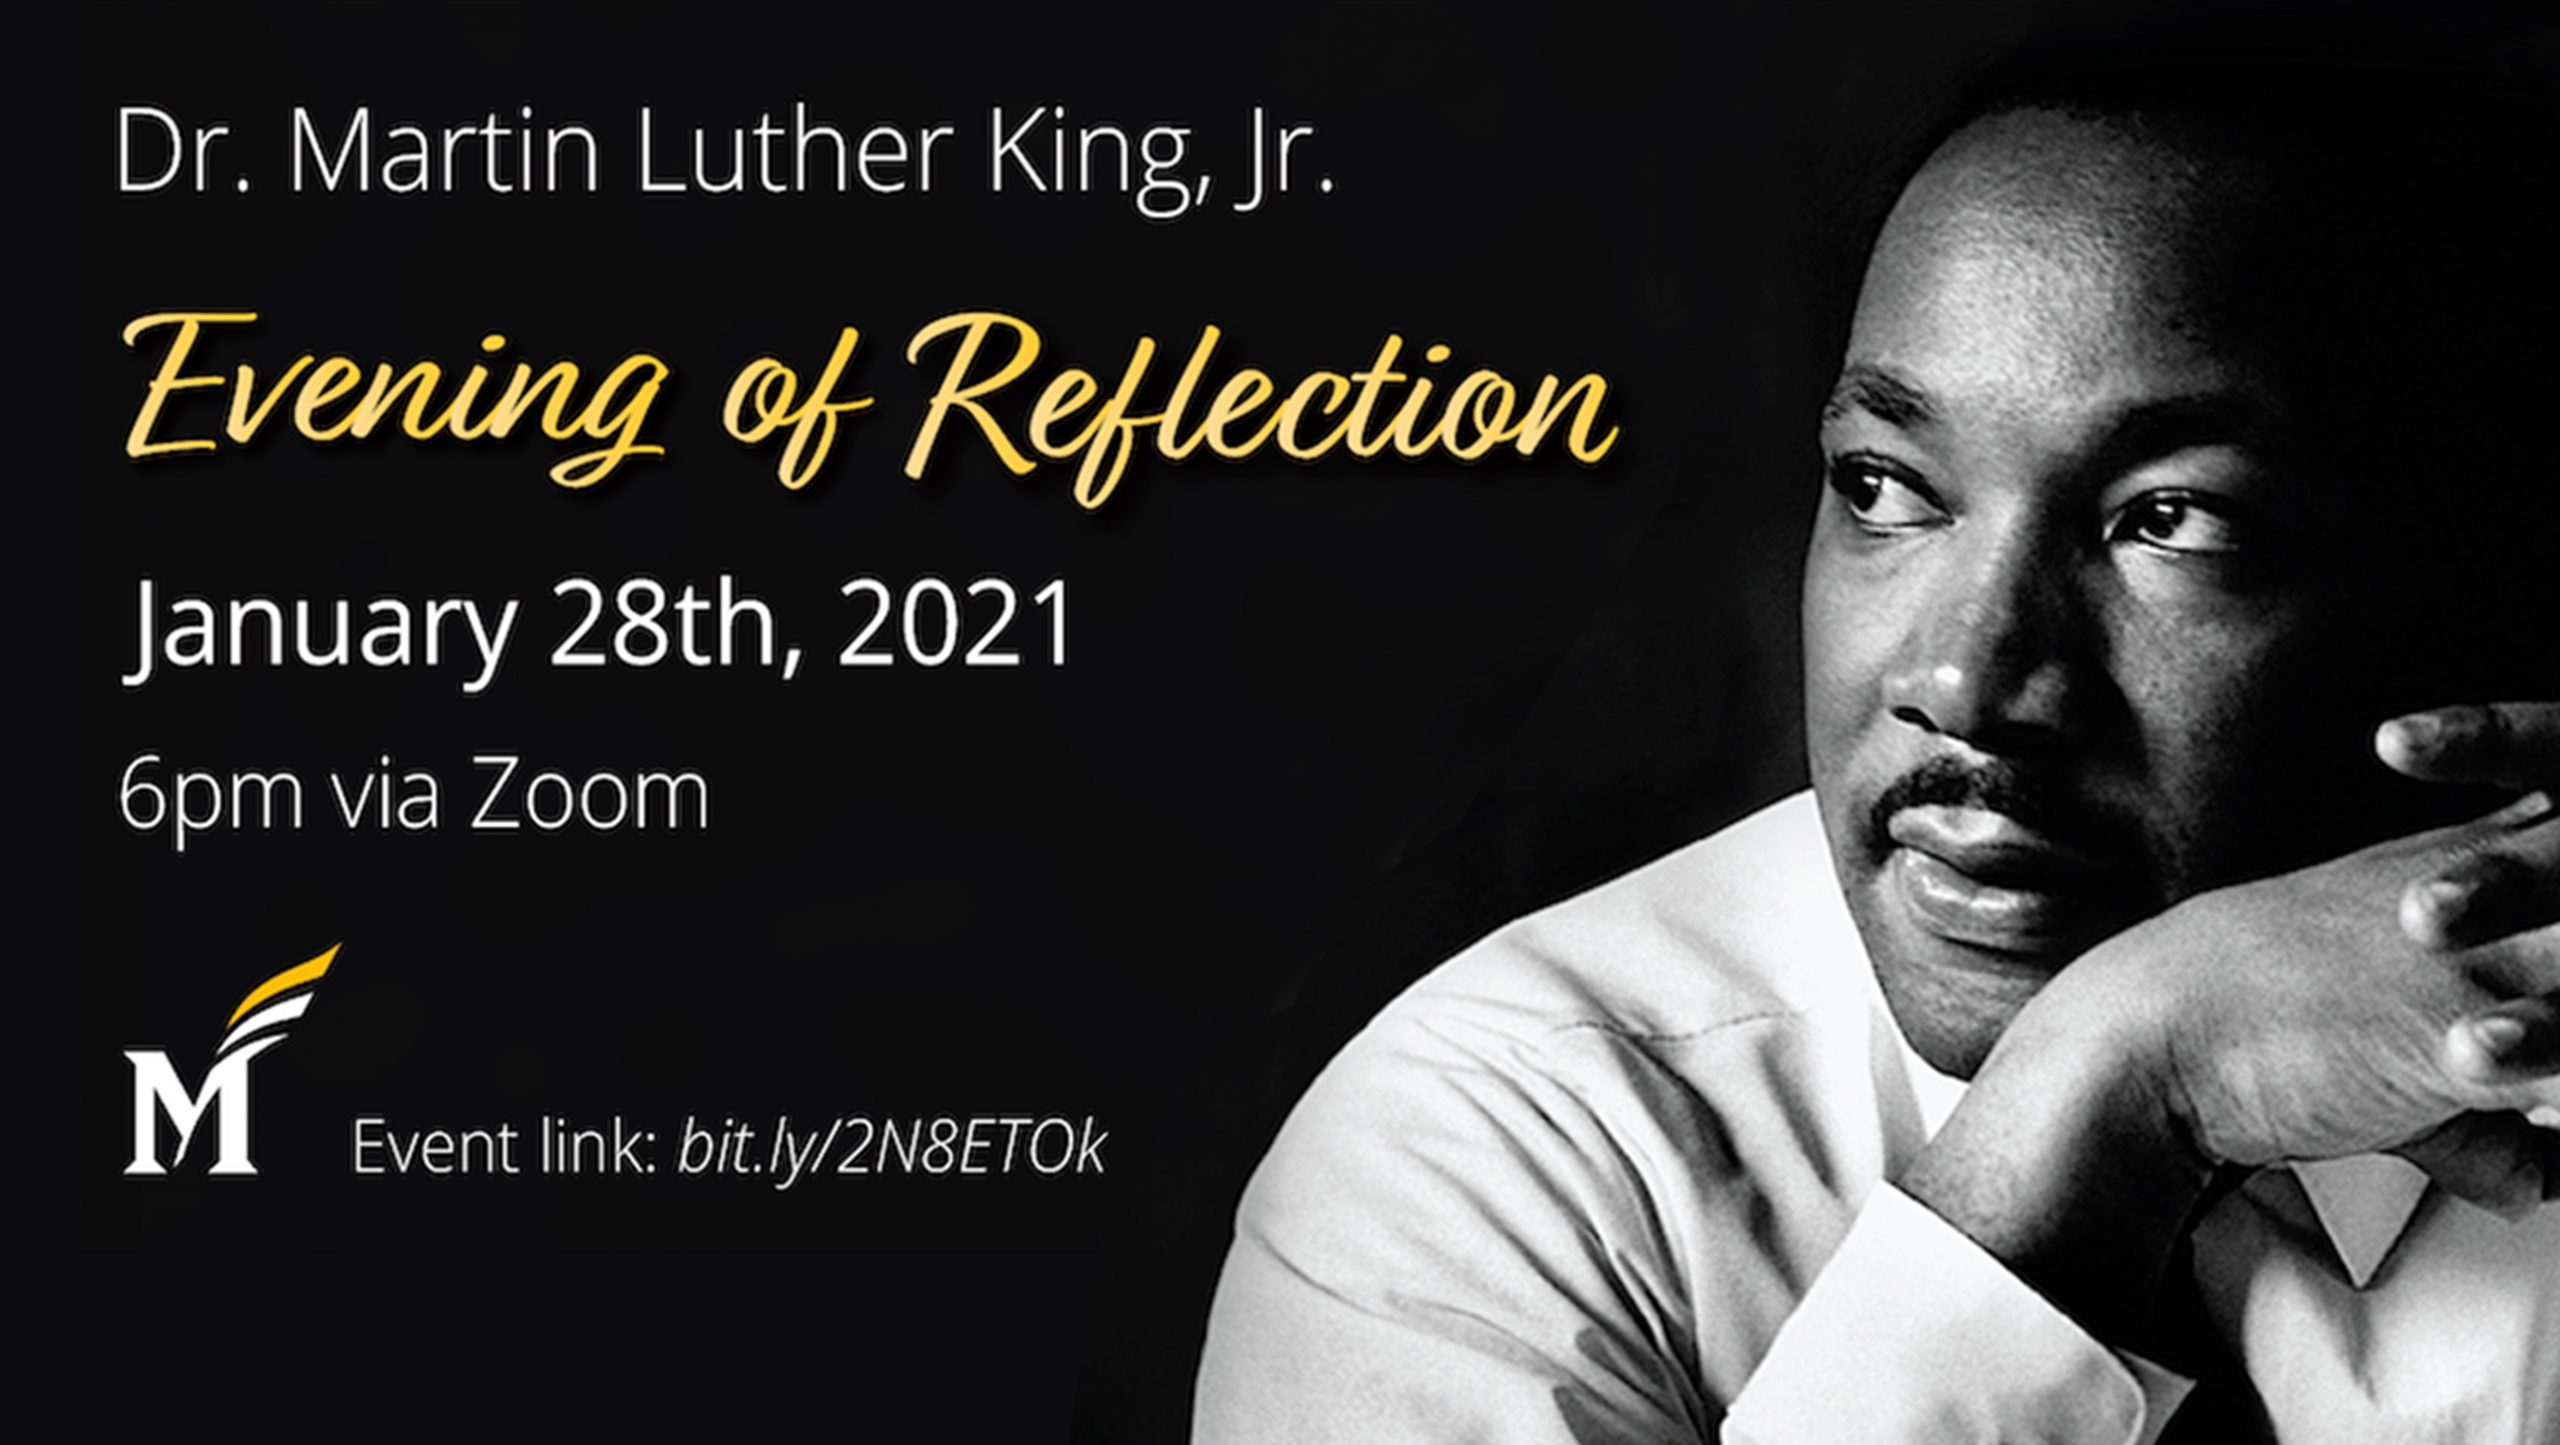 2021 Dr. Martin Luther King, Jr. Evening of Reflection